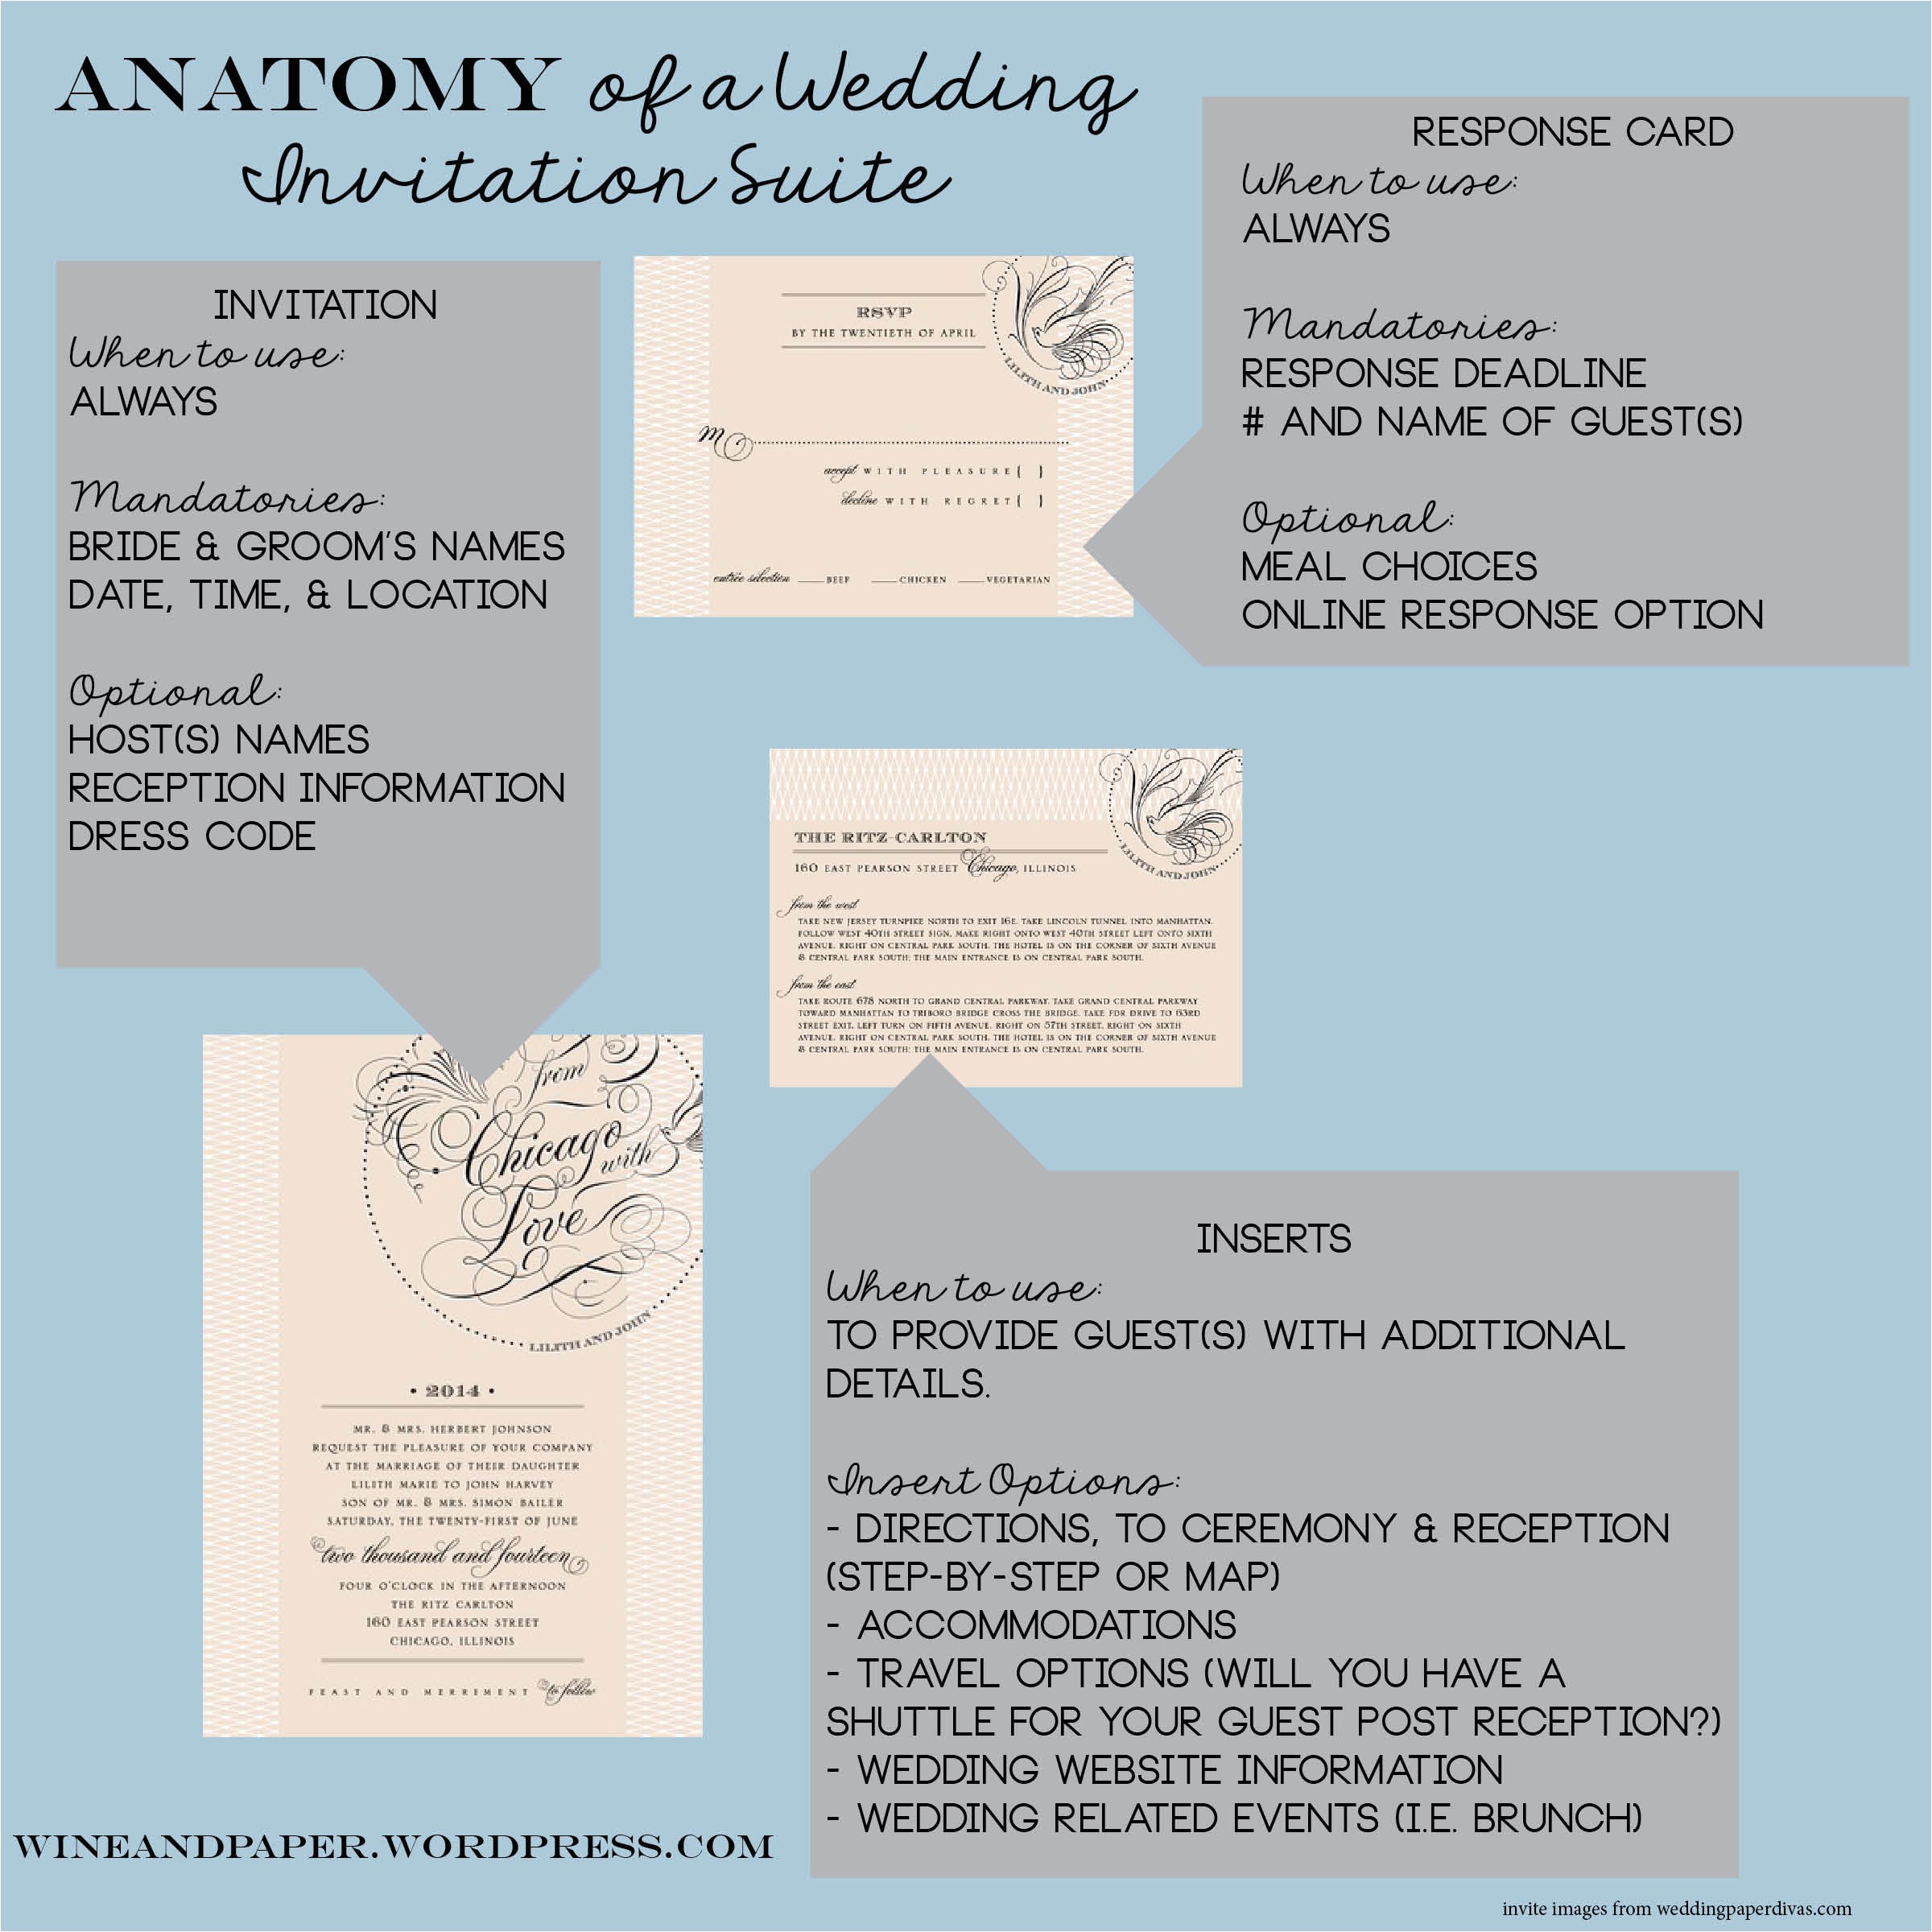 the anatomy of a wedding invitation suite